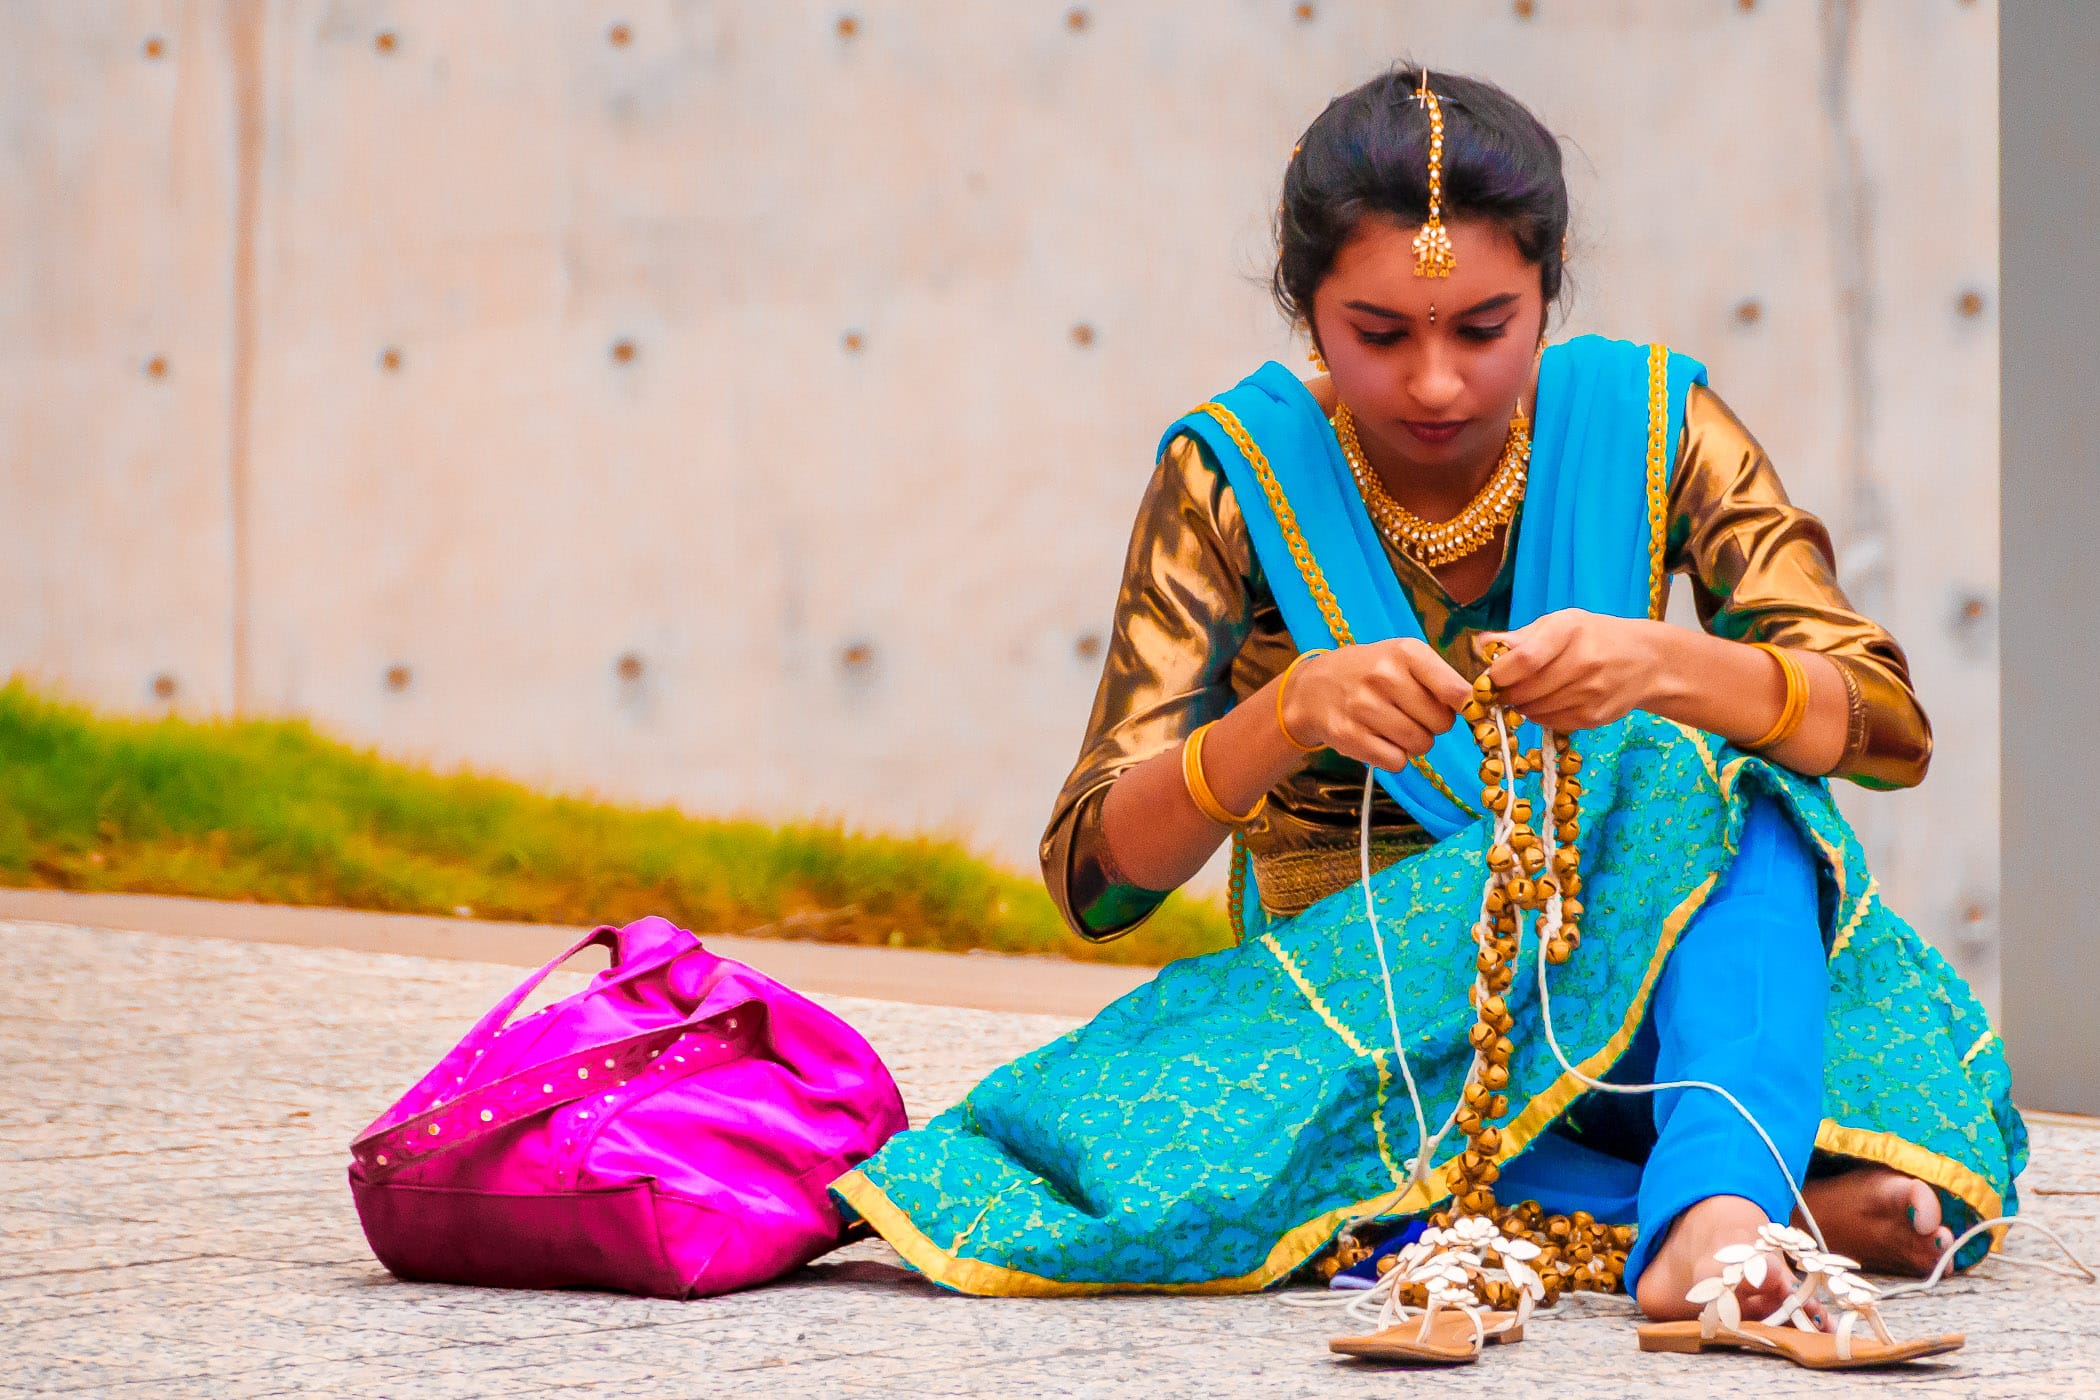 A dancer at the Dallas International Festival prepares her accoutrements before performing.